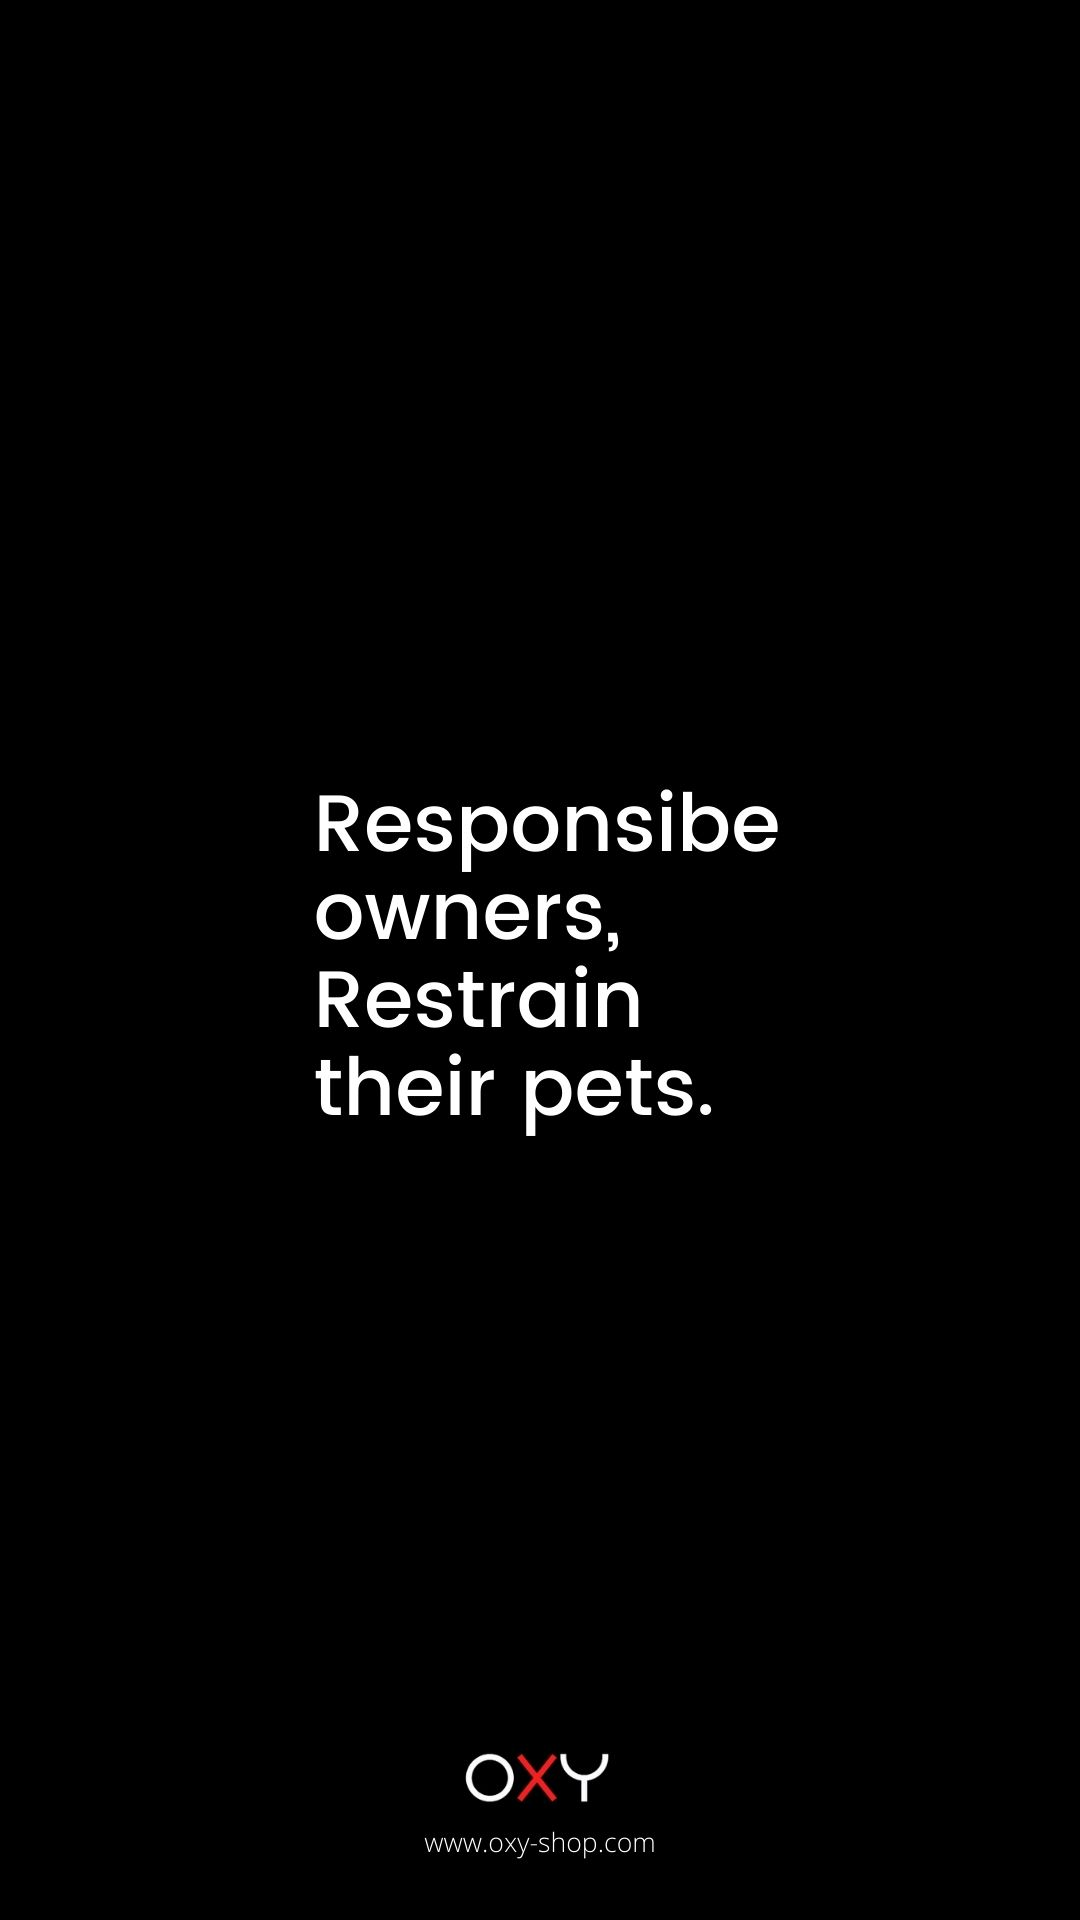 Responsible Owners, Restrain their Pets. - BDSM wallpaper  